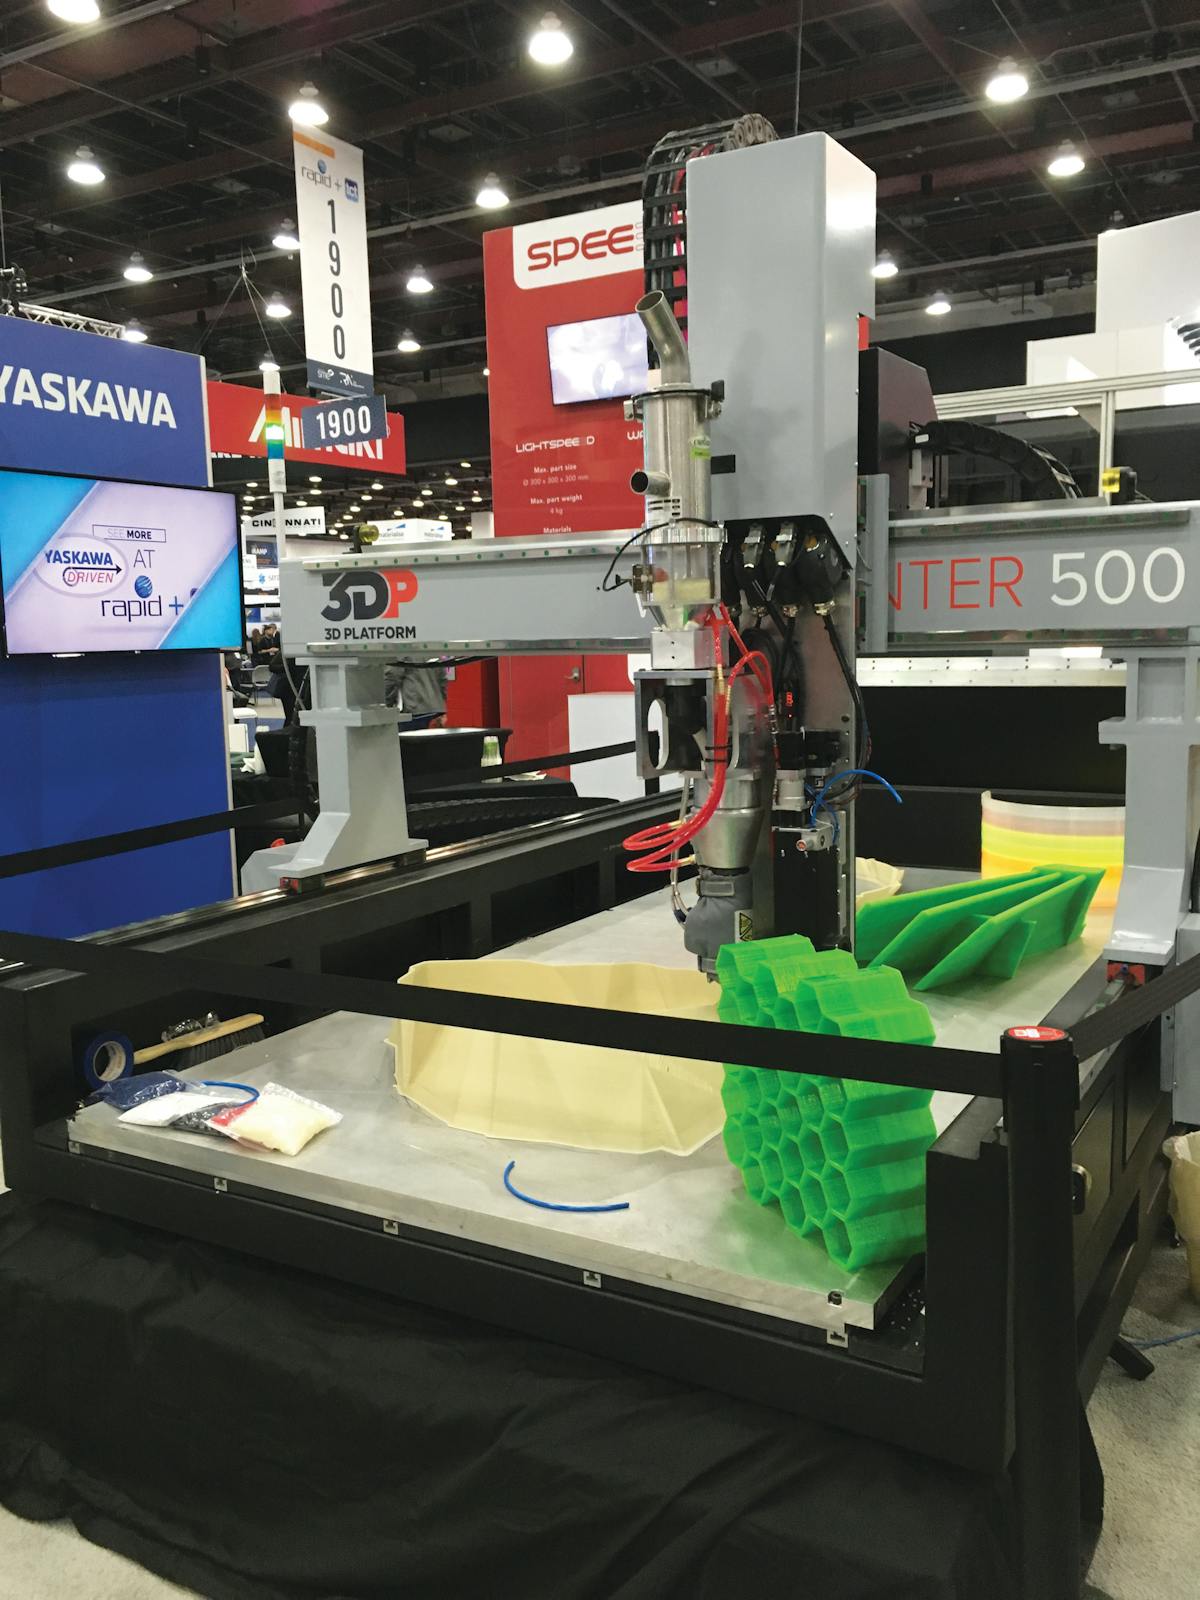 By making use of Tim Womer&rsquo;s TWW Micro Extruder, 3D Platform&rsquo;s new WorkCenter 500 printer can process pellets for 3-D printing, rather than filament.